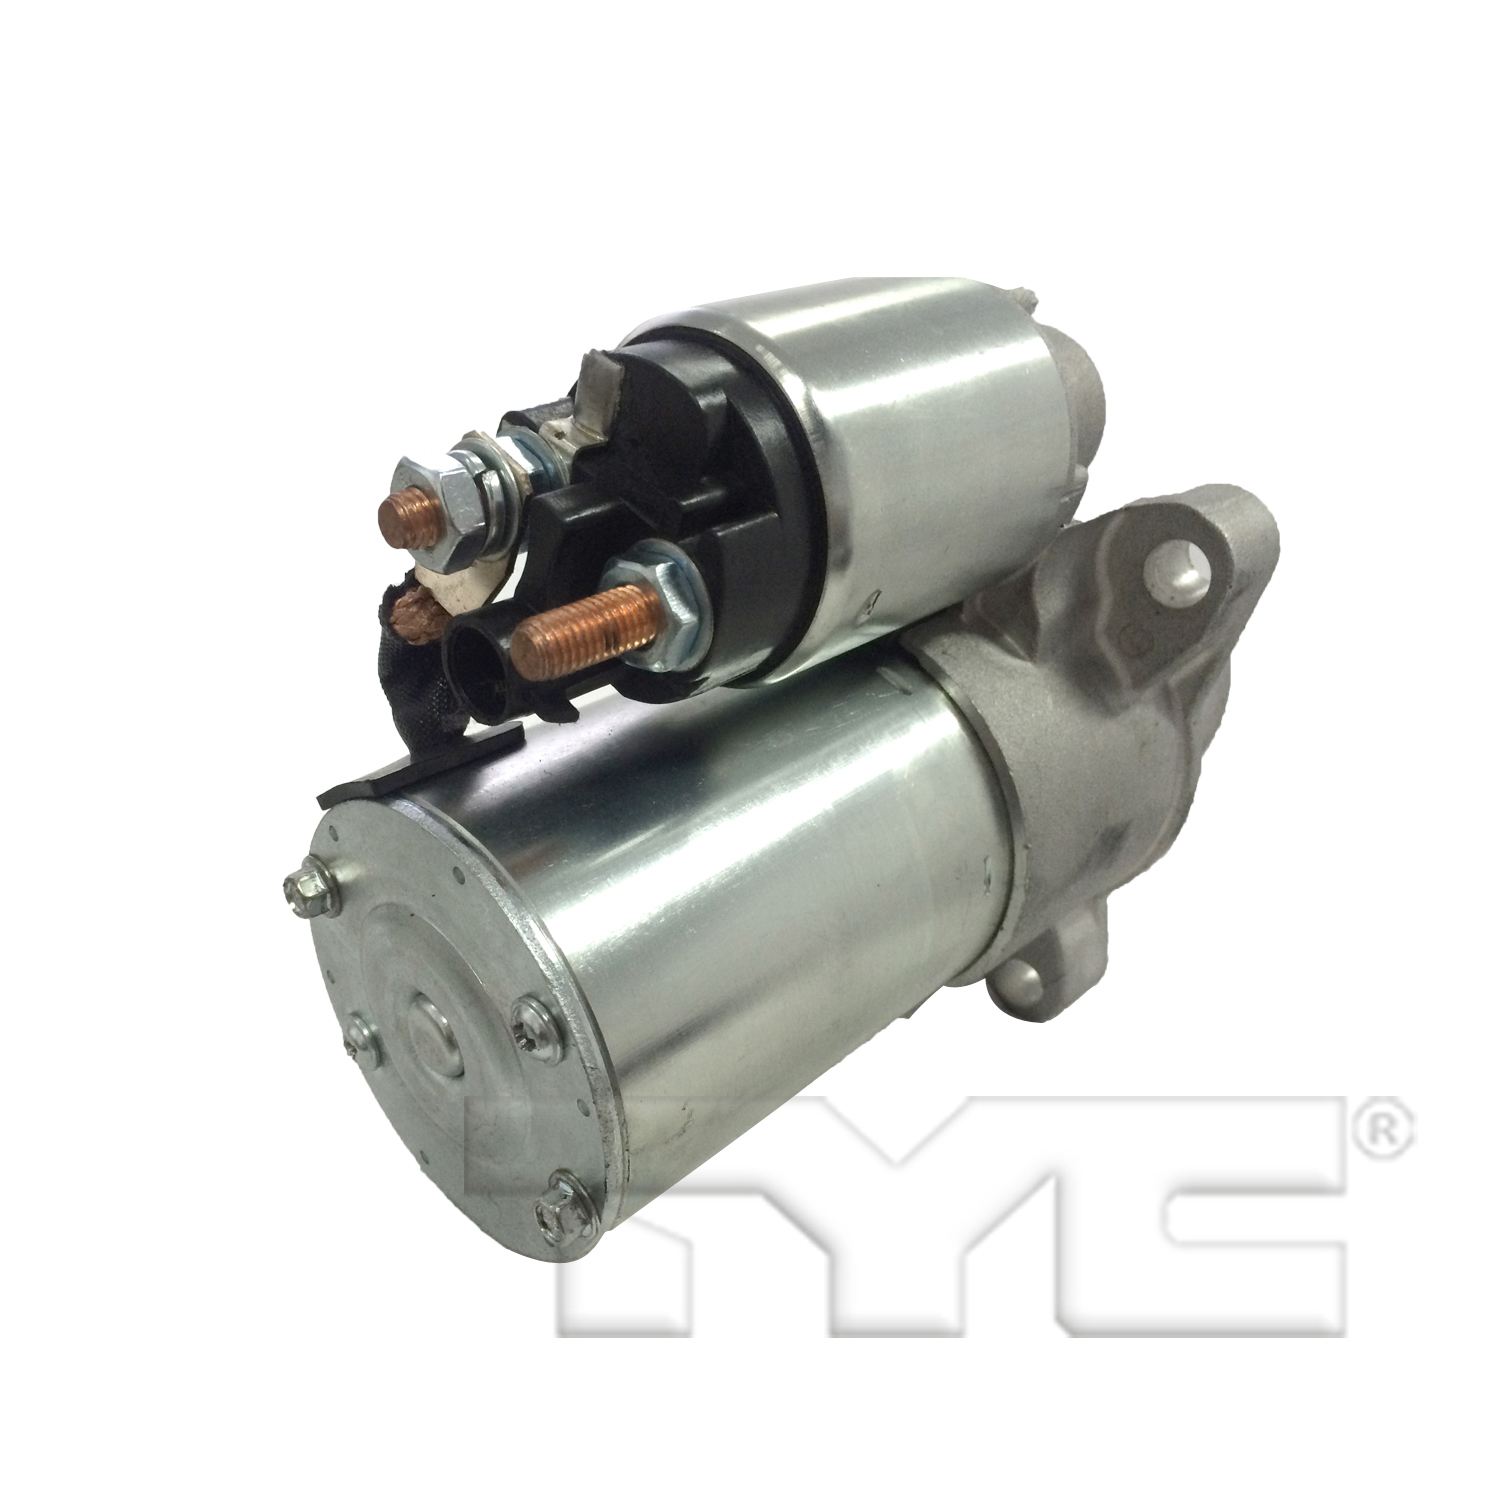 TYC-1-06497_NEW TYC STARTER 12V 11T CW PMGR DELCO PG260H 1.4KW